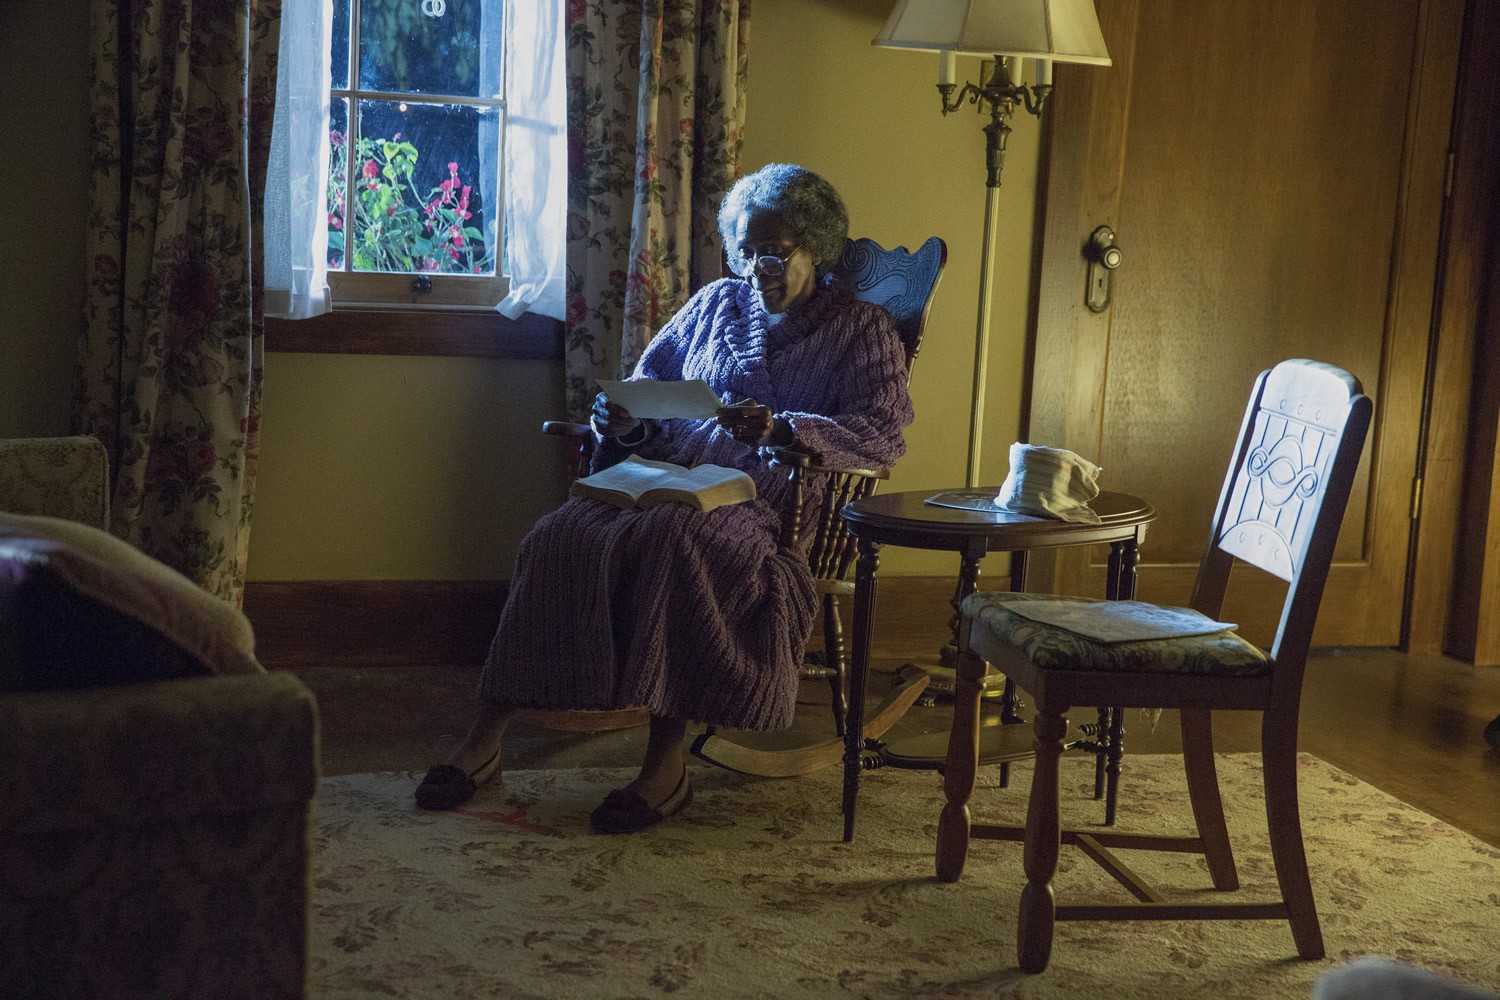 Cicely Tyson stars as Mrs. Watts in Lifetime's The Trip to Bountiful (2014). Photo credit by Bob Mahoney.